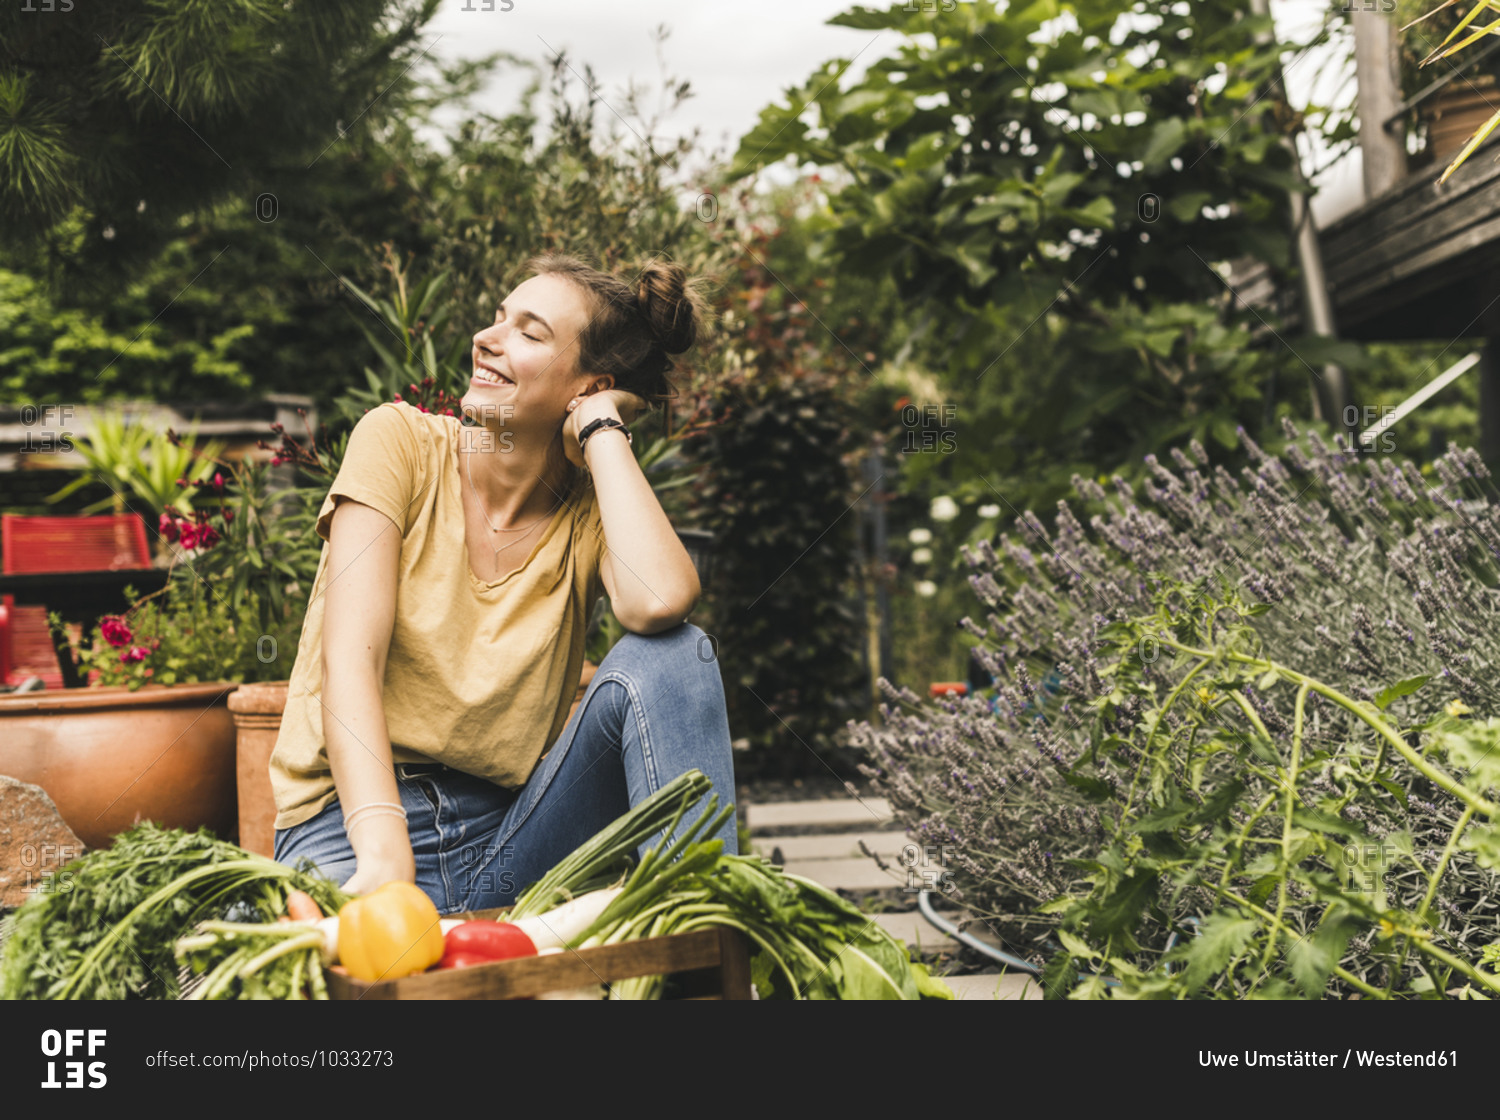 Young woman with eyes closed sitting by vegetables and plants in community garden